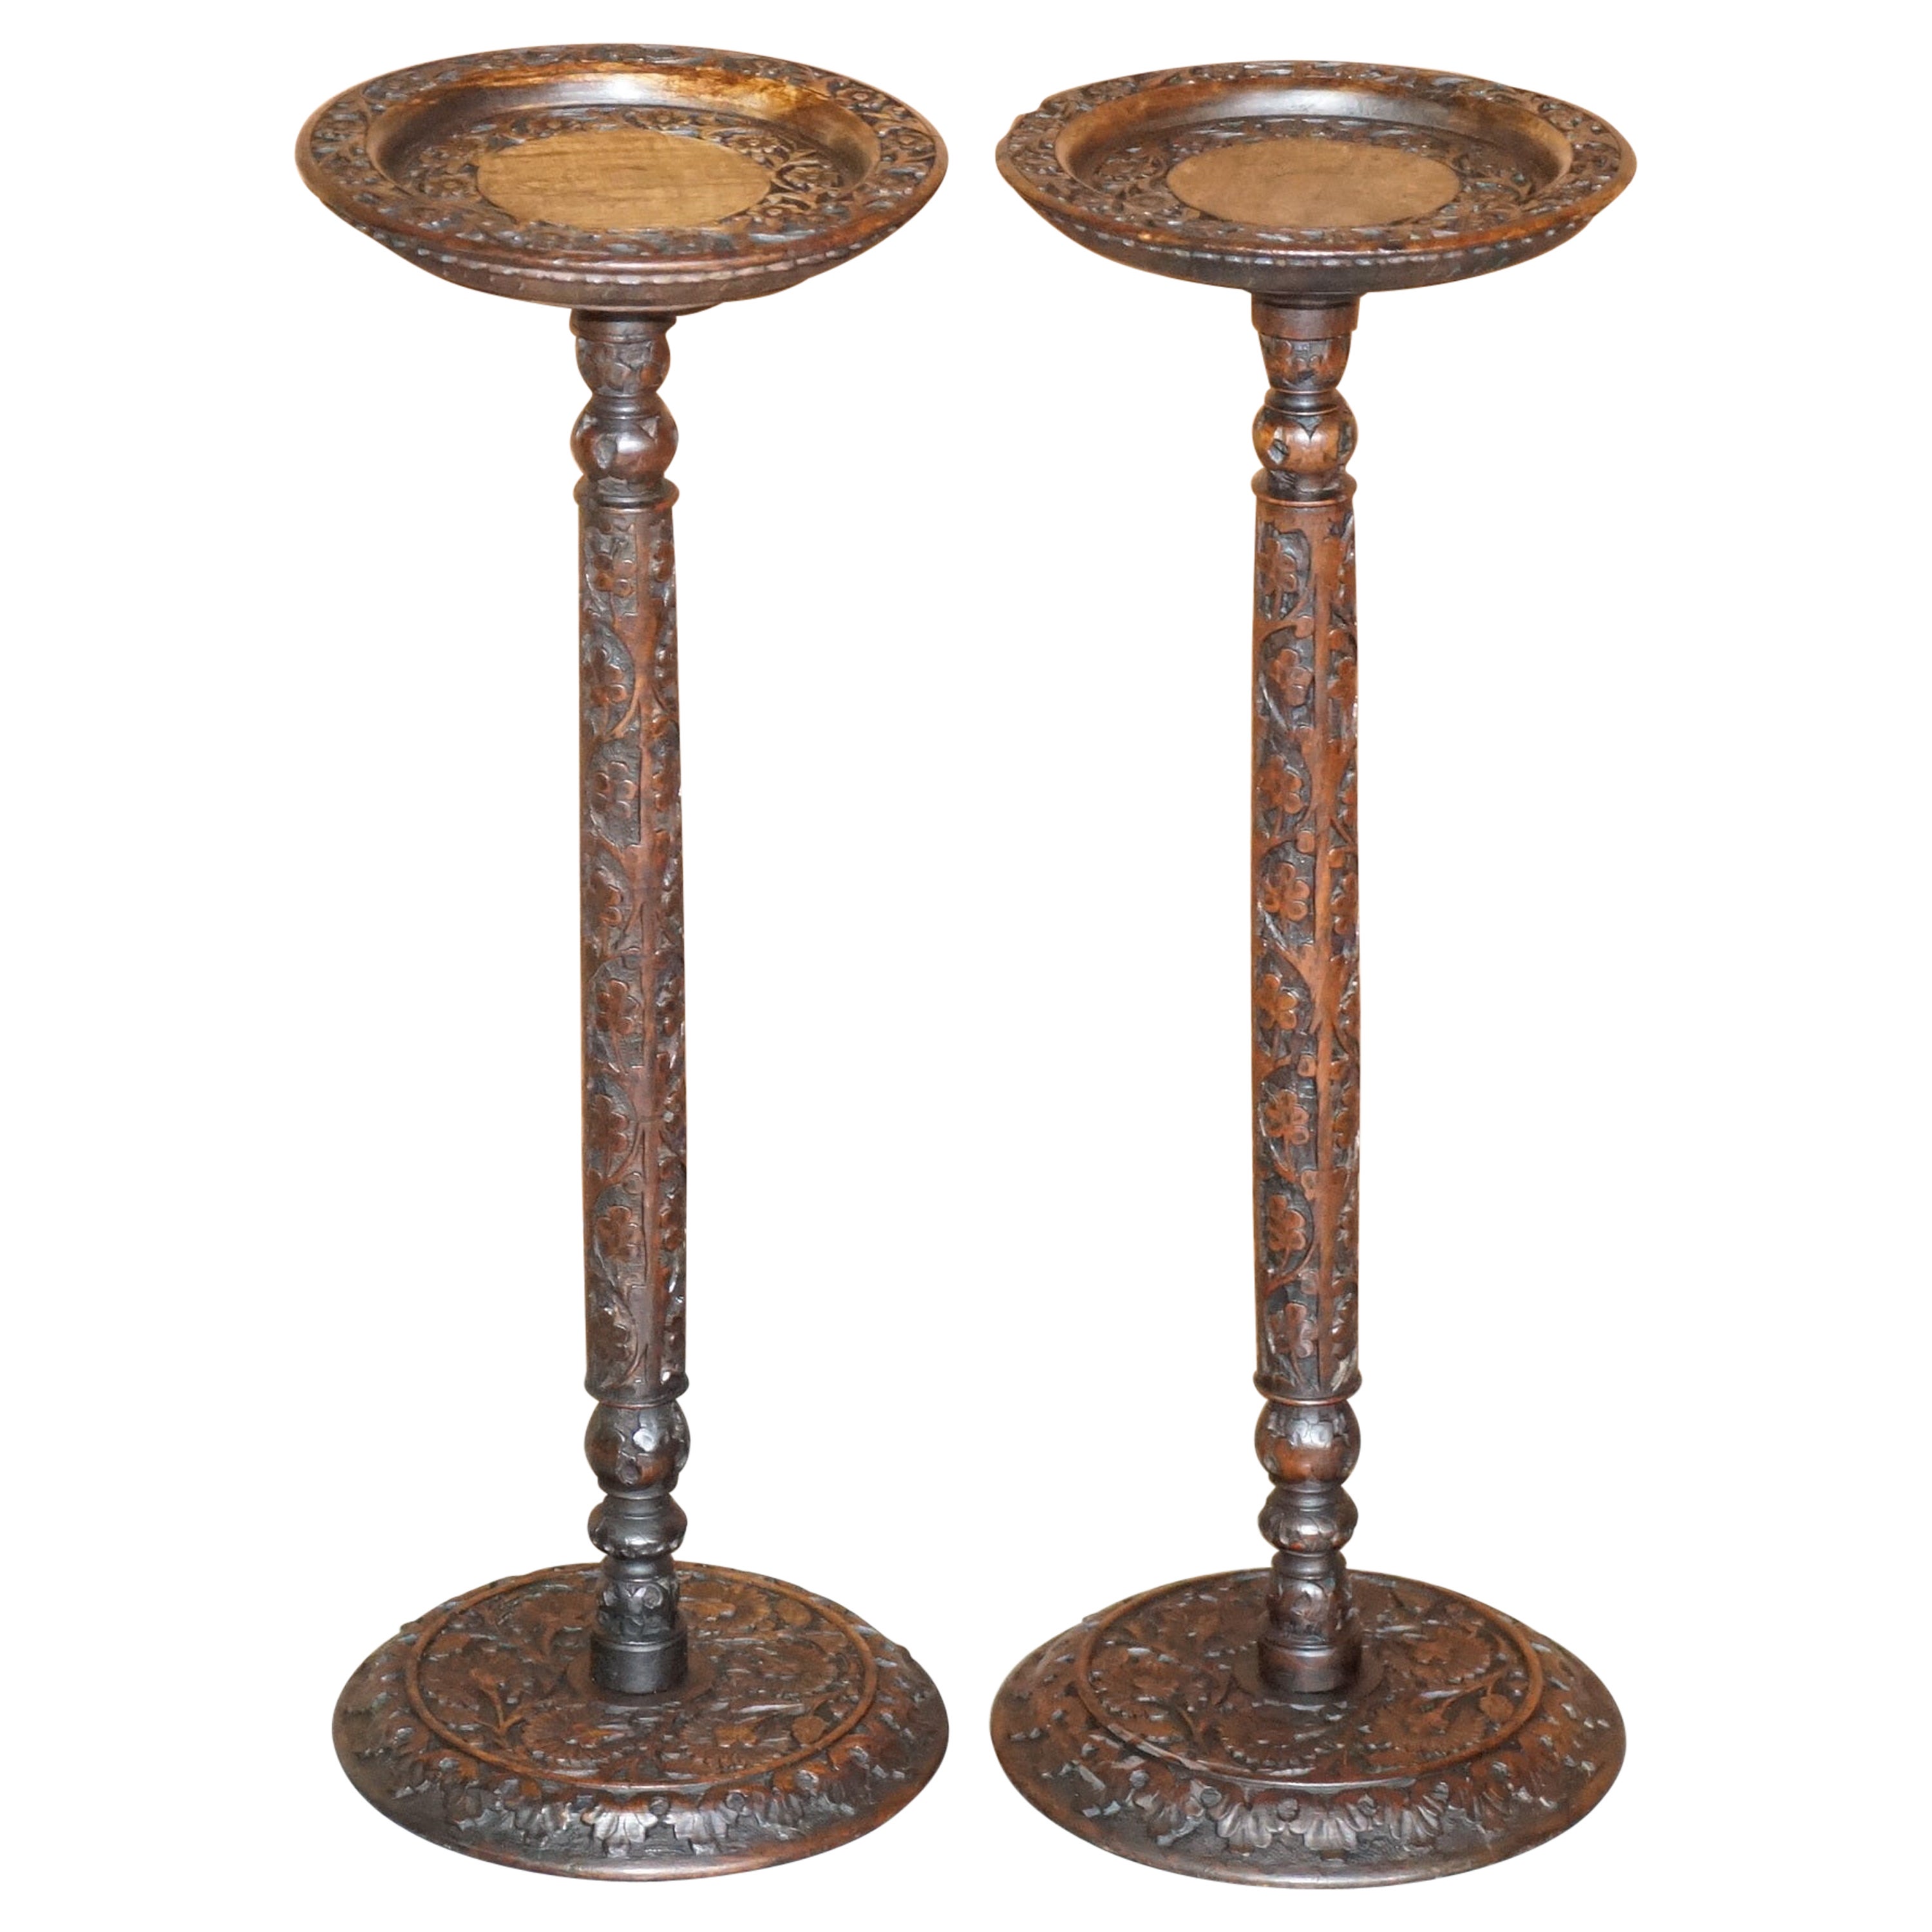 Pair of Antique circa 1900 Heavily Carved Anglo Indian Jardiner Pedestal Stands